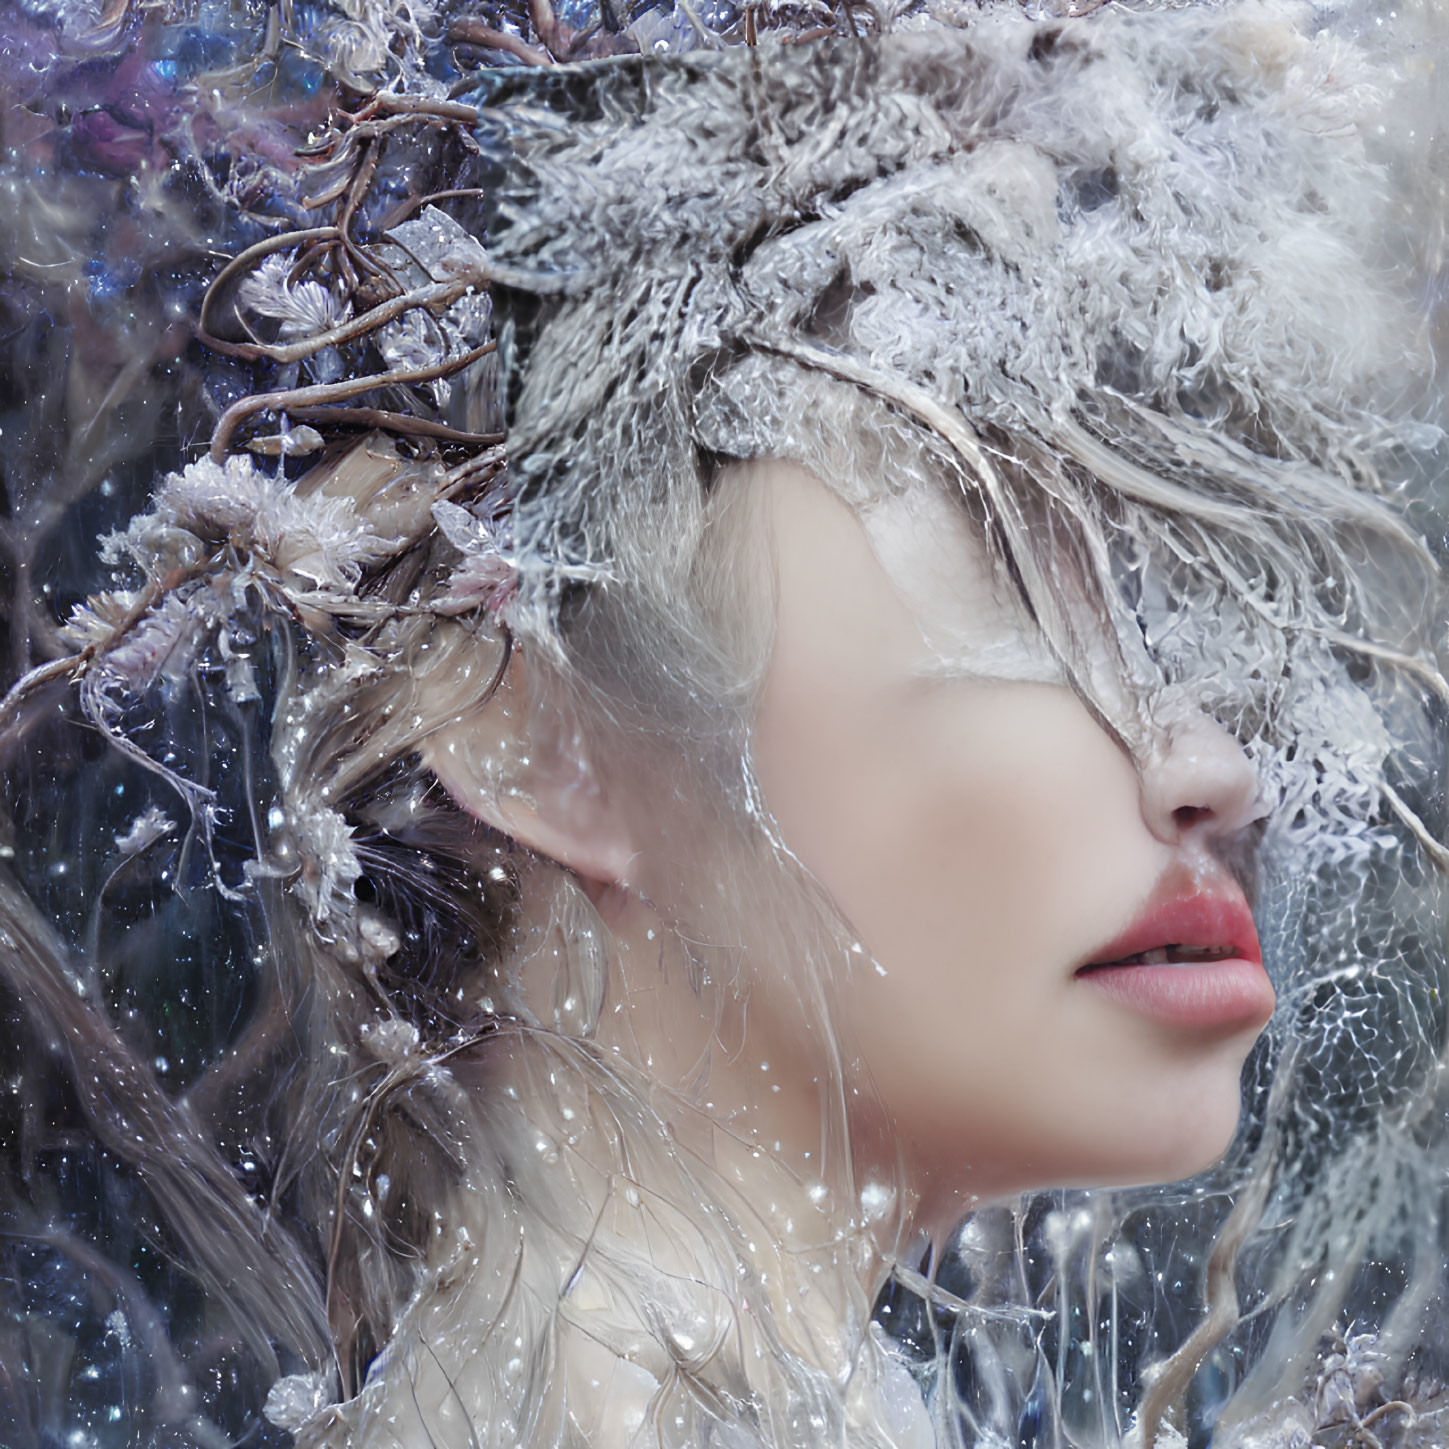 Ethereal close-up portrait with icy appearance and frost-like textures